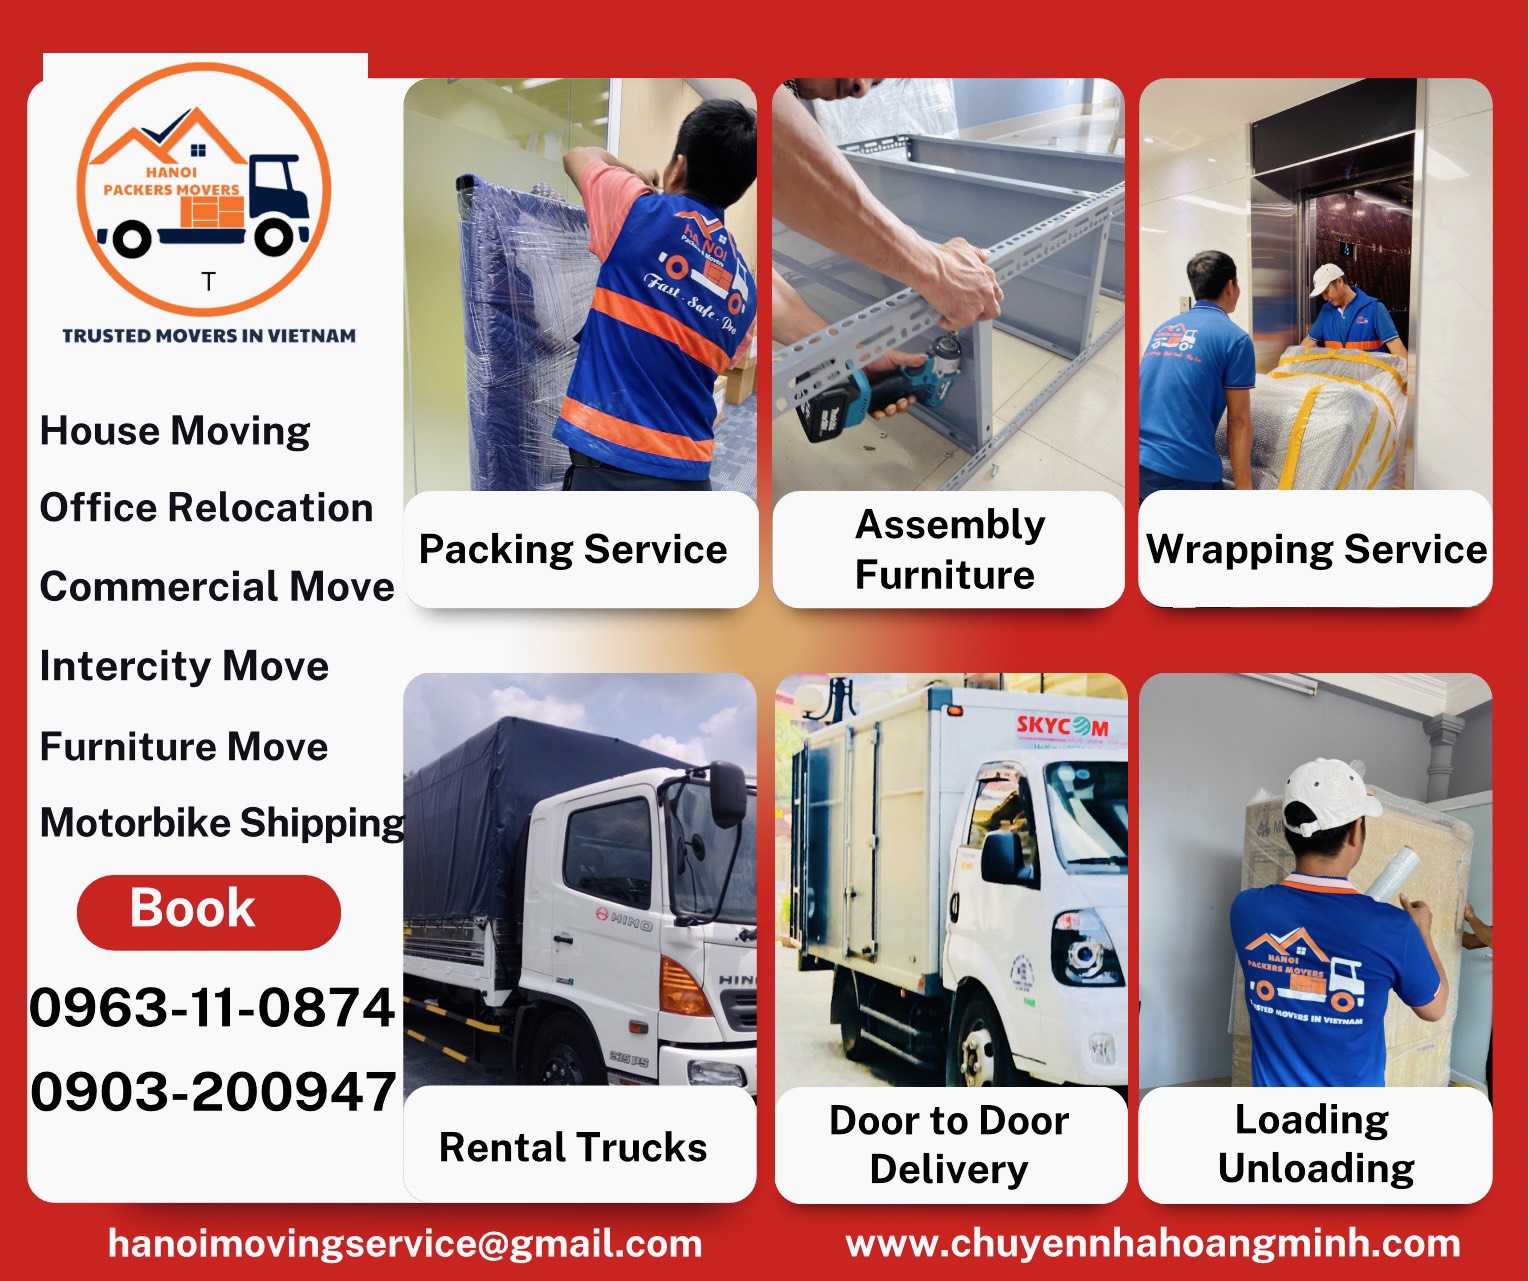 Hanoi Packers Movers provide moving service 